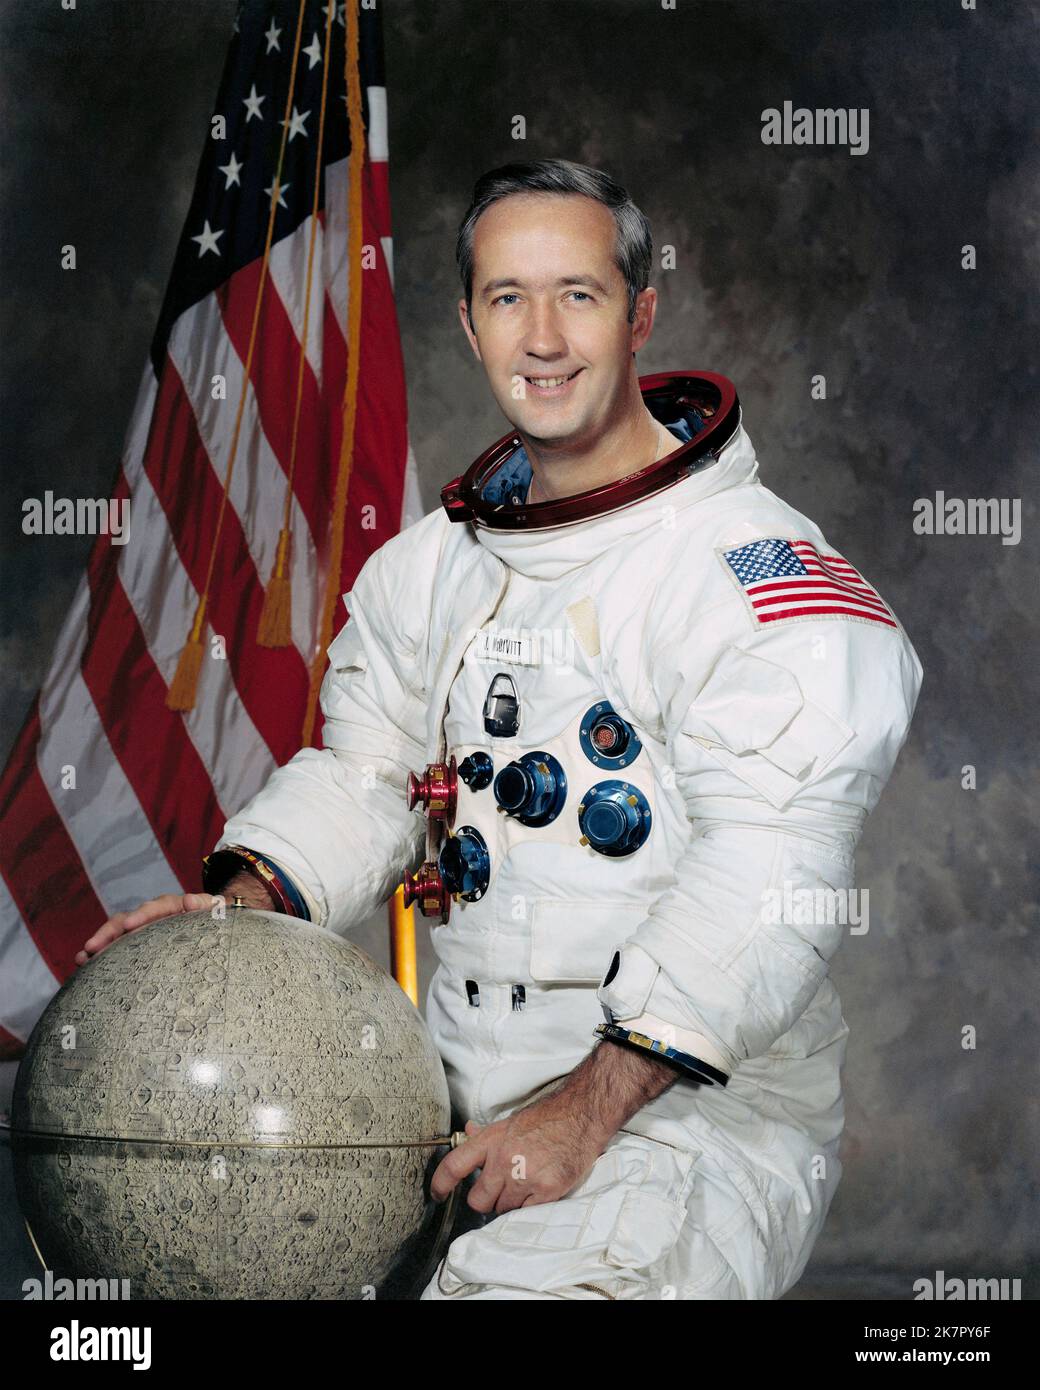 Houston, United States. 18th Oct, 2022. NASA studio portrait of astronaut James A. McDivitt, in his Apollo spacesuit at the Johnson Space Center, January 1, 1971 in Houston, Texas. McDivitt commanded the first spacewalk mission and took part in the first crewed orbital flight of a the lunar module, during Apollo 9 died October 15, 2022 at age 93. Credit: NASA/NASA/Alamy Live News Stock Photo